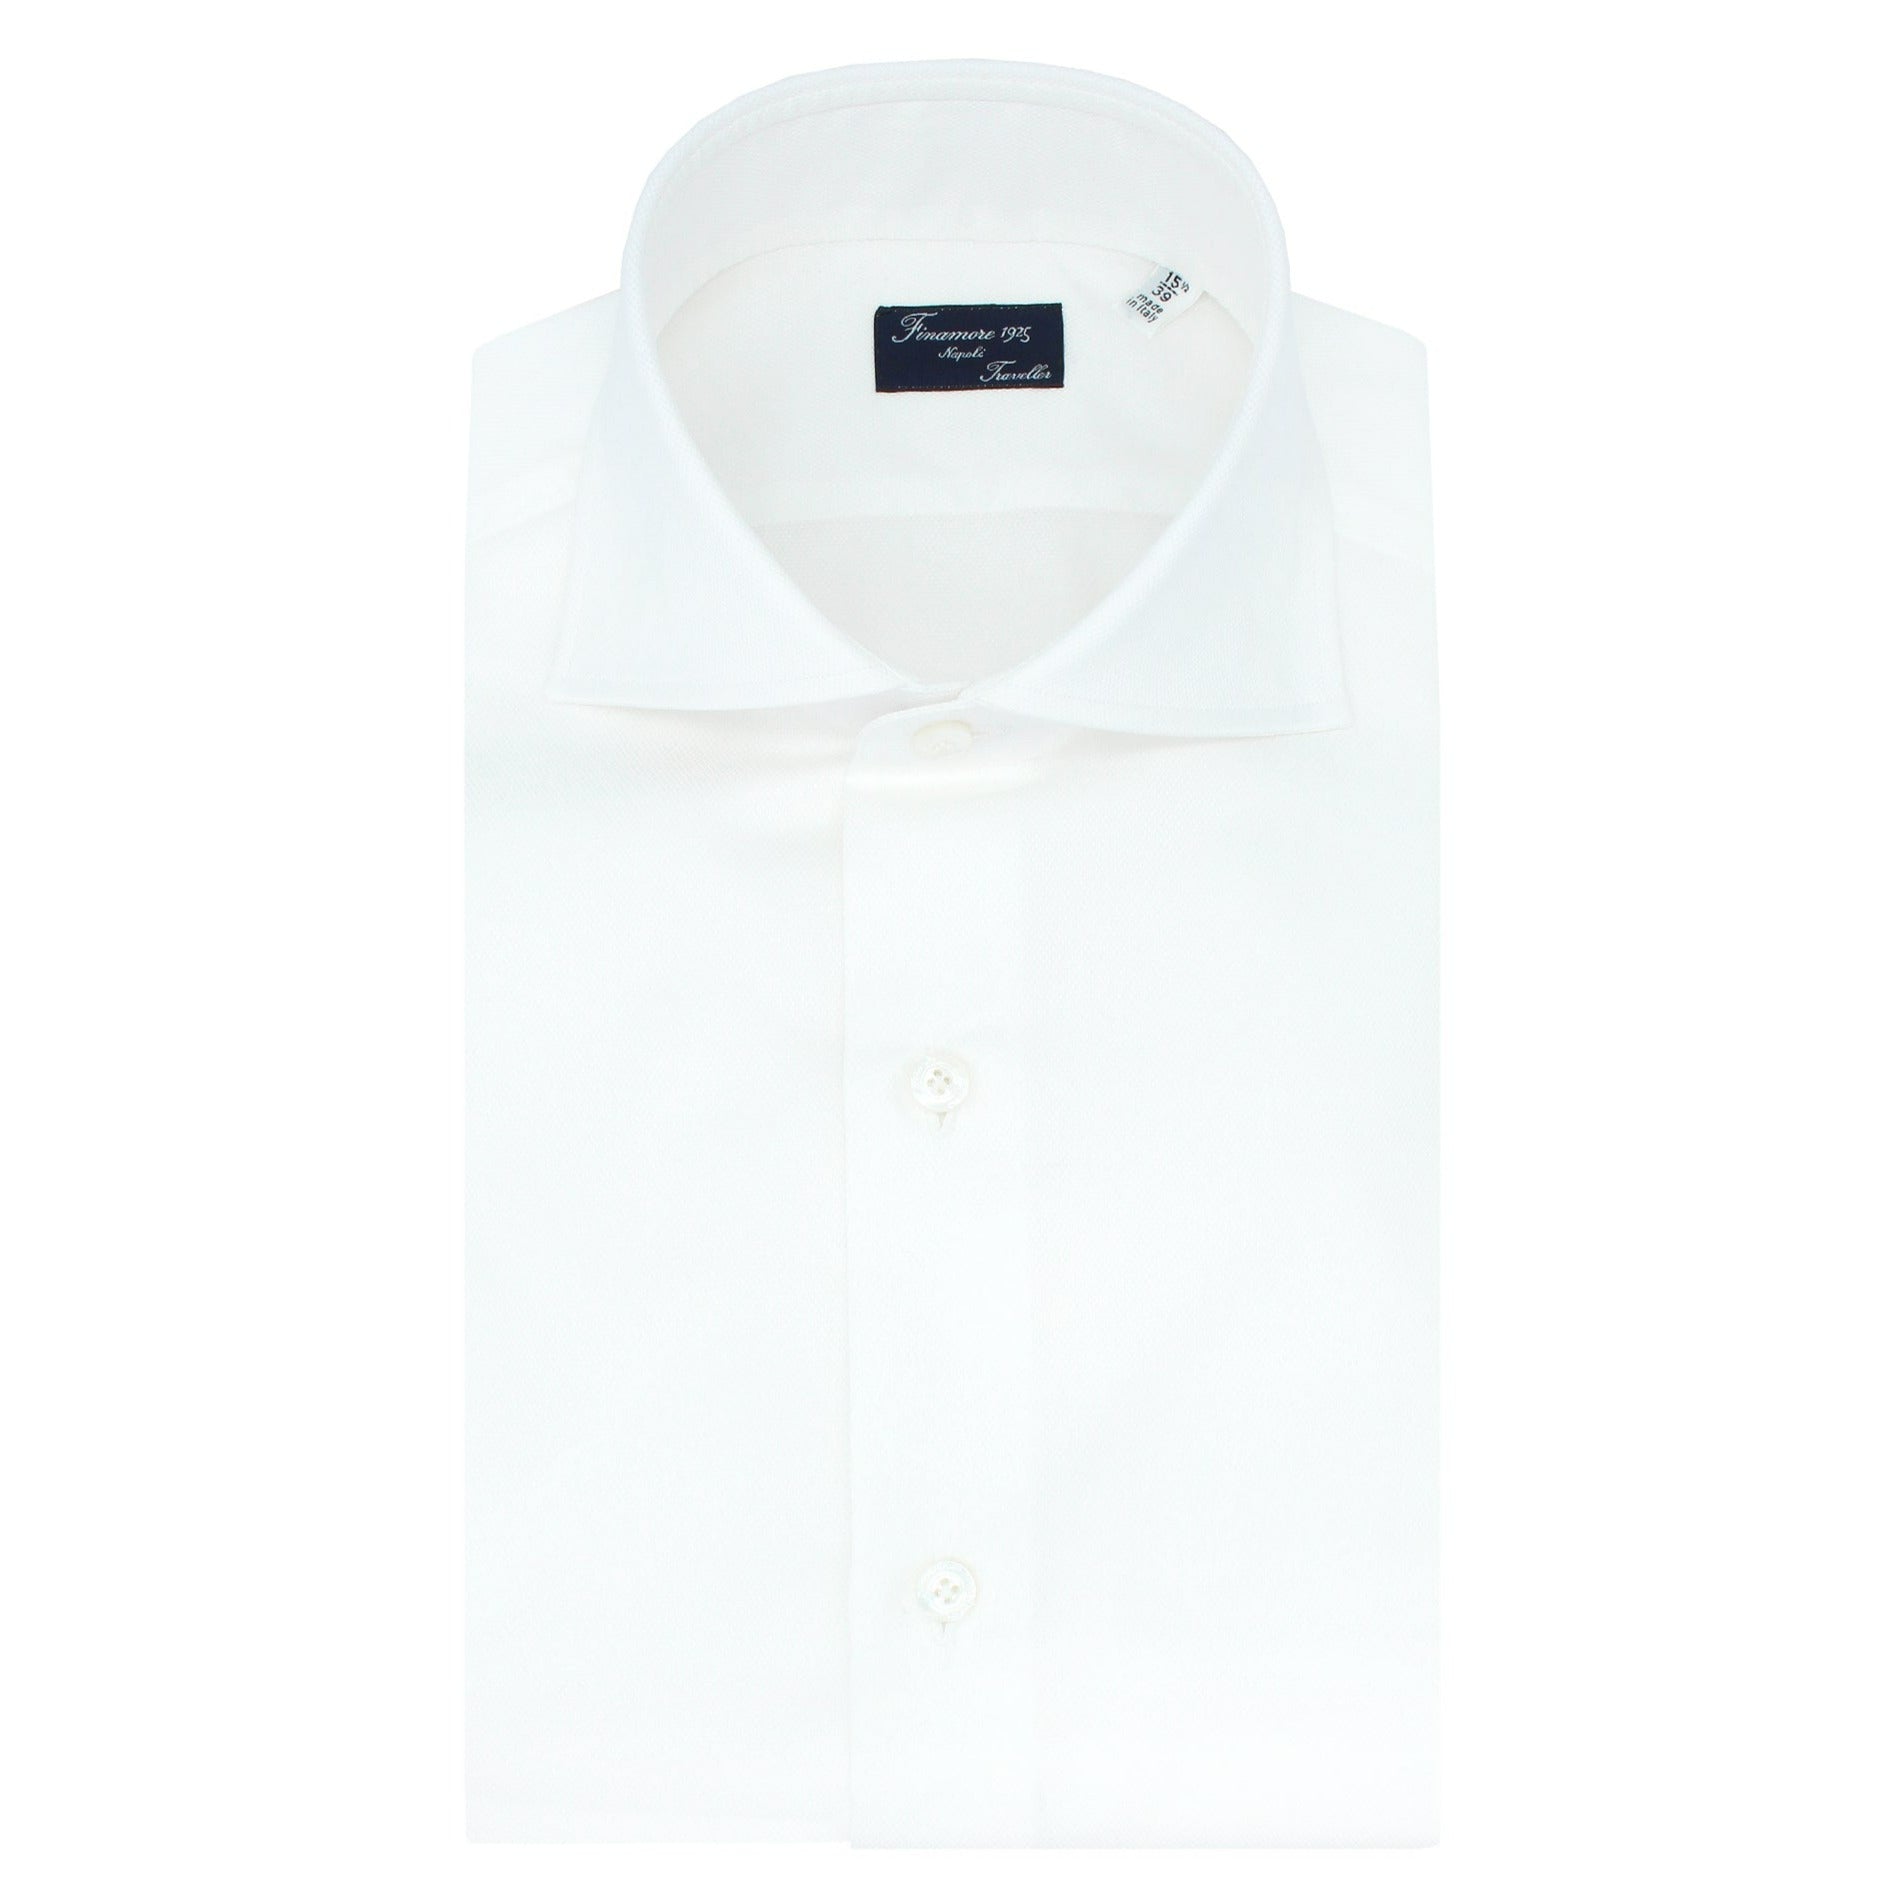 Classic NAPOLI traveller regular fit shirt in white cotton